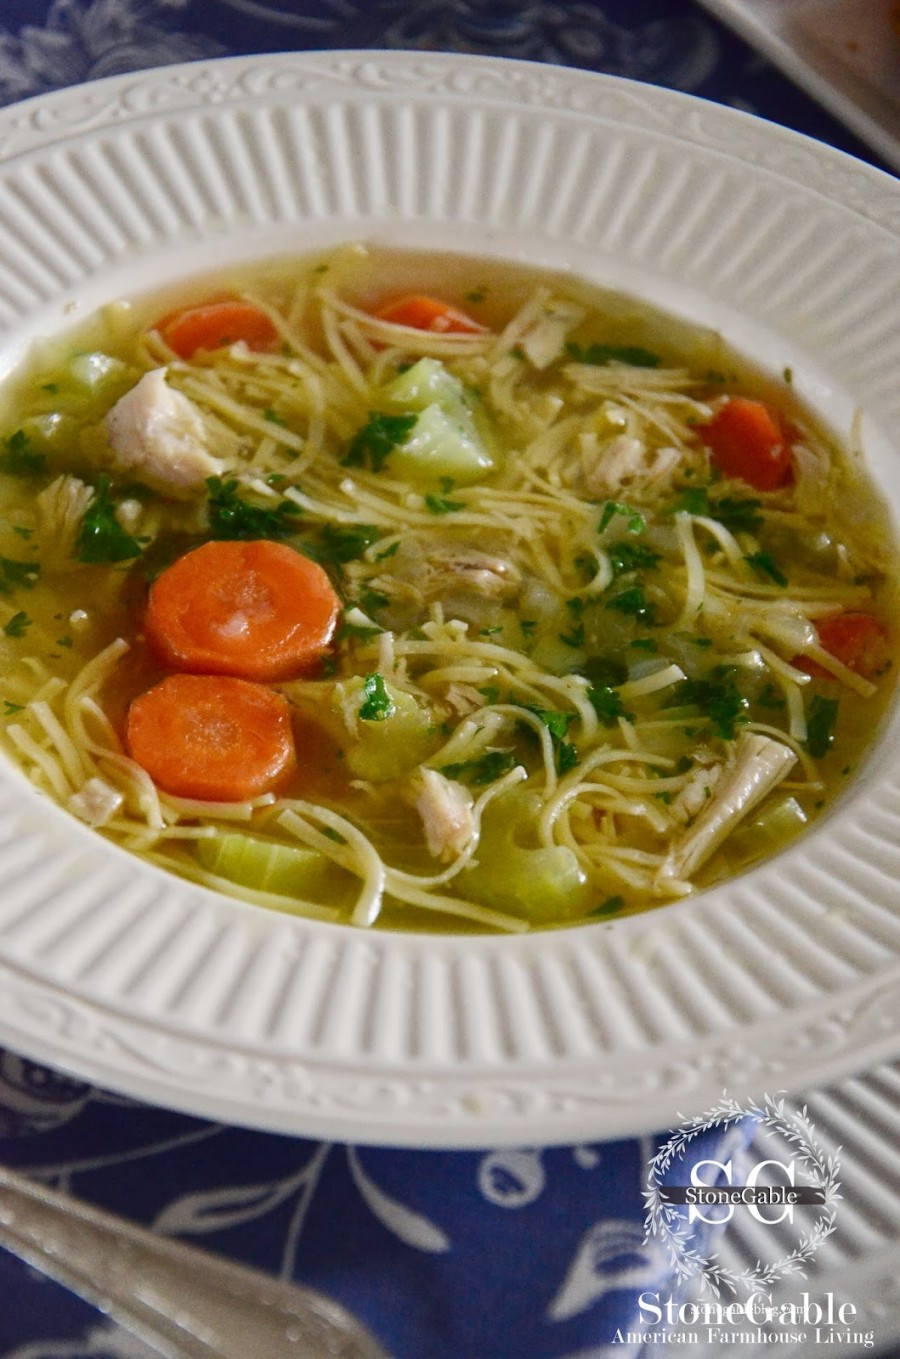 How To Make Chicken Soup
 How To Make Perfect Chicken Noodle Soup